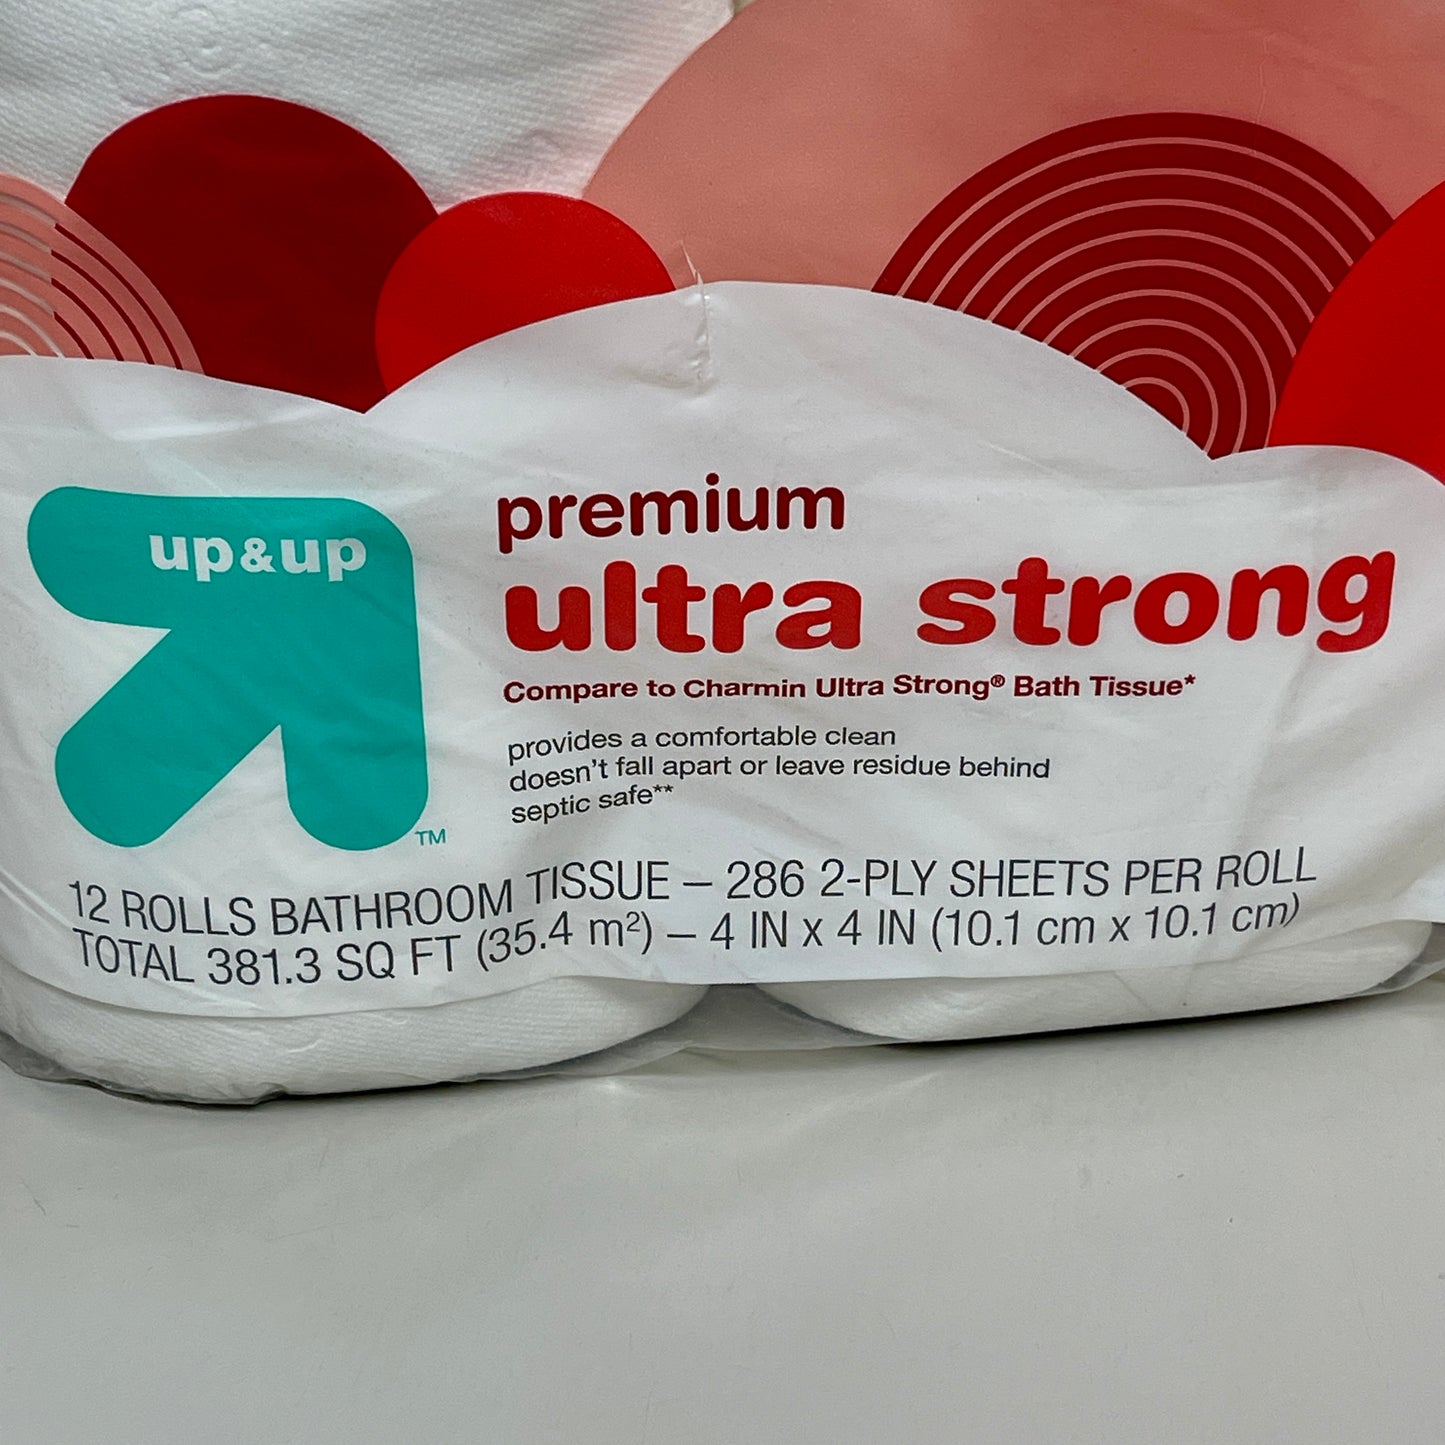 za@ UP & UP (TARGET) 24 ROLLS! 2-Ply Premium Ultra Strong Bathroom Tissue / Toilet Paper (New)